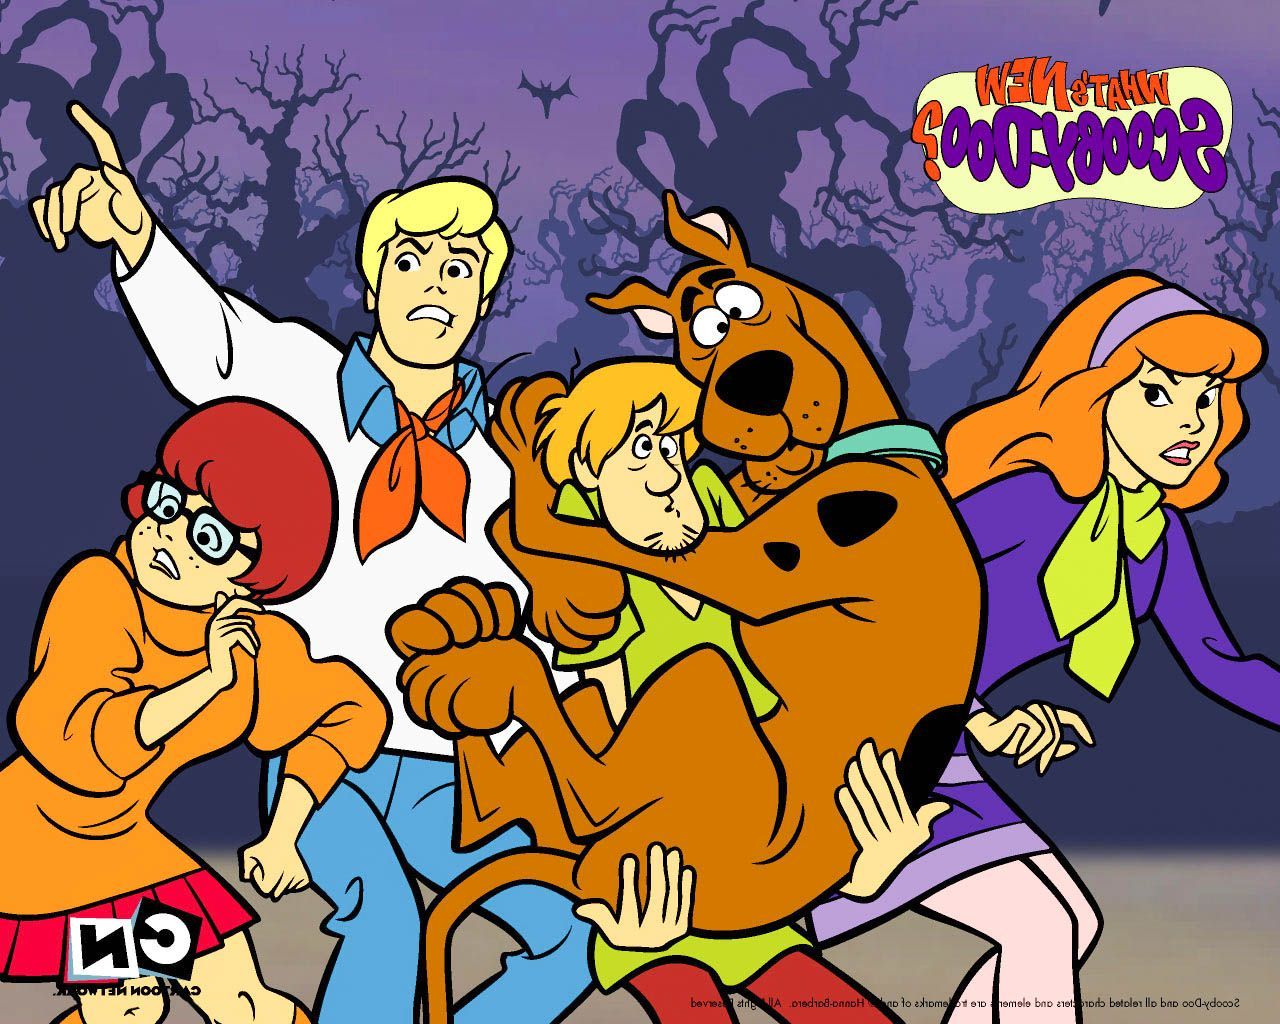 Funny Scooby Doo Wallpaper & Background Beautiful Best Available For Download Funny Scooby Doo Photo Free On Zicxa.com Image